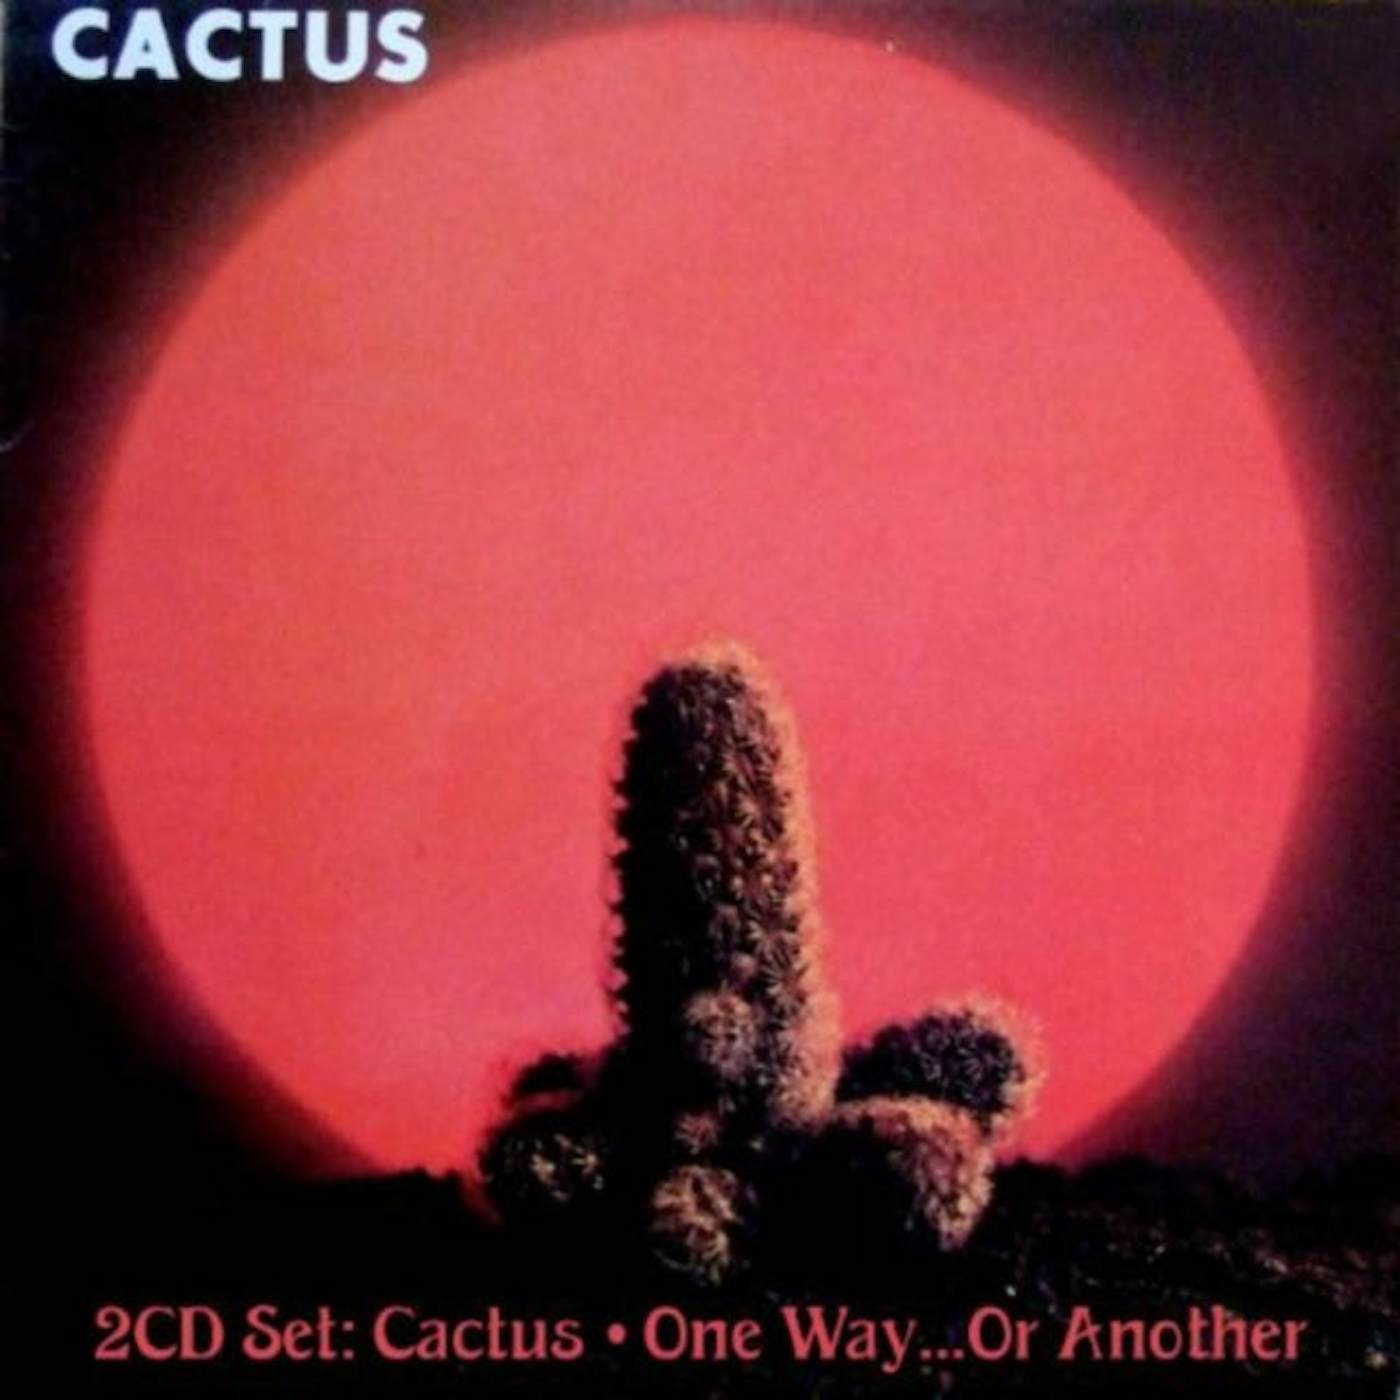 Long Tall Sally / Rock 'n' Roll Children by Cactus (Single